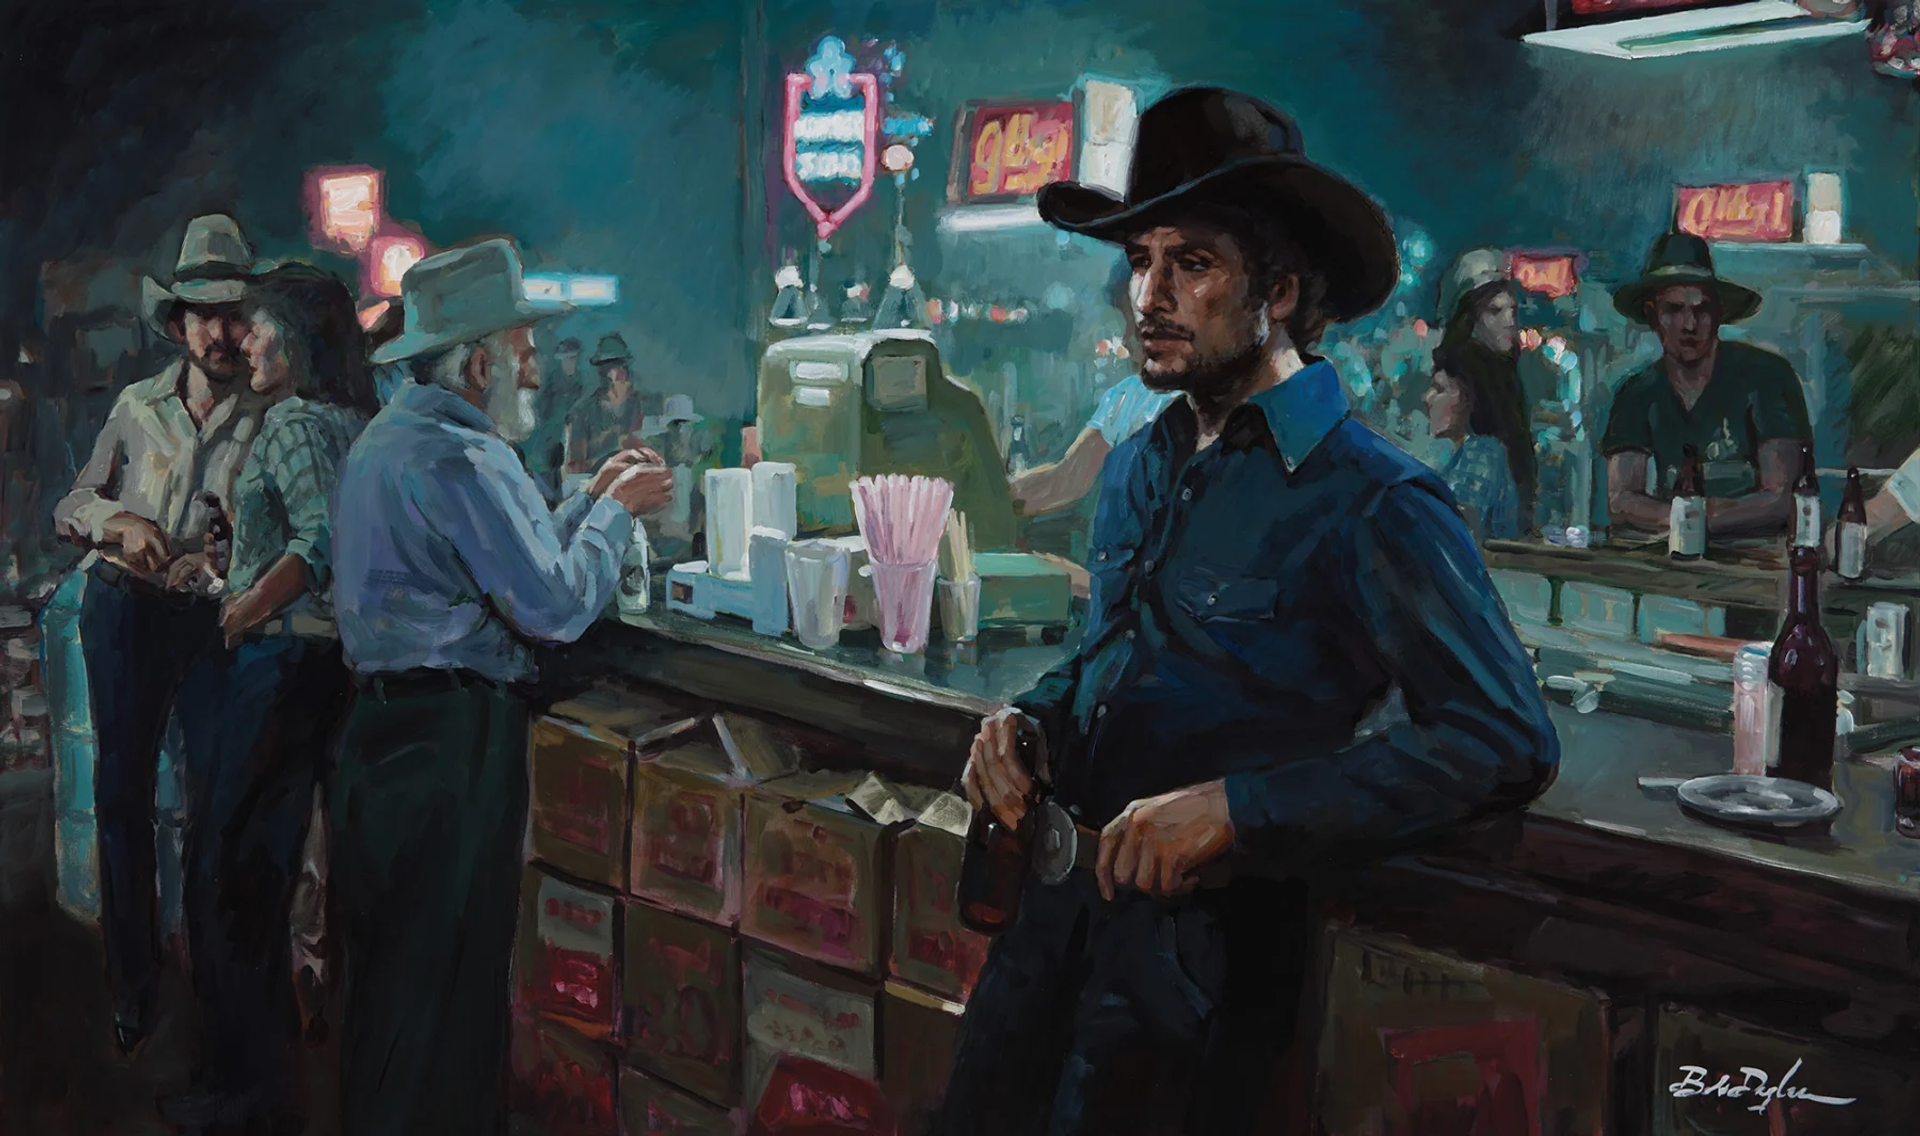 The central figure, a cowboy wearing a blue denim shirt tucked into his jeans leans his back and two elbows against a bar, wearing a cowboy hat with a straoghtforward stare. Other figures are visble in the room all dressed in the similar buttoned up shirts, denim, jeans, and cowboy hats. 